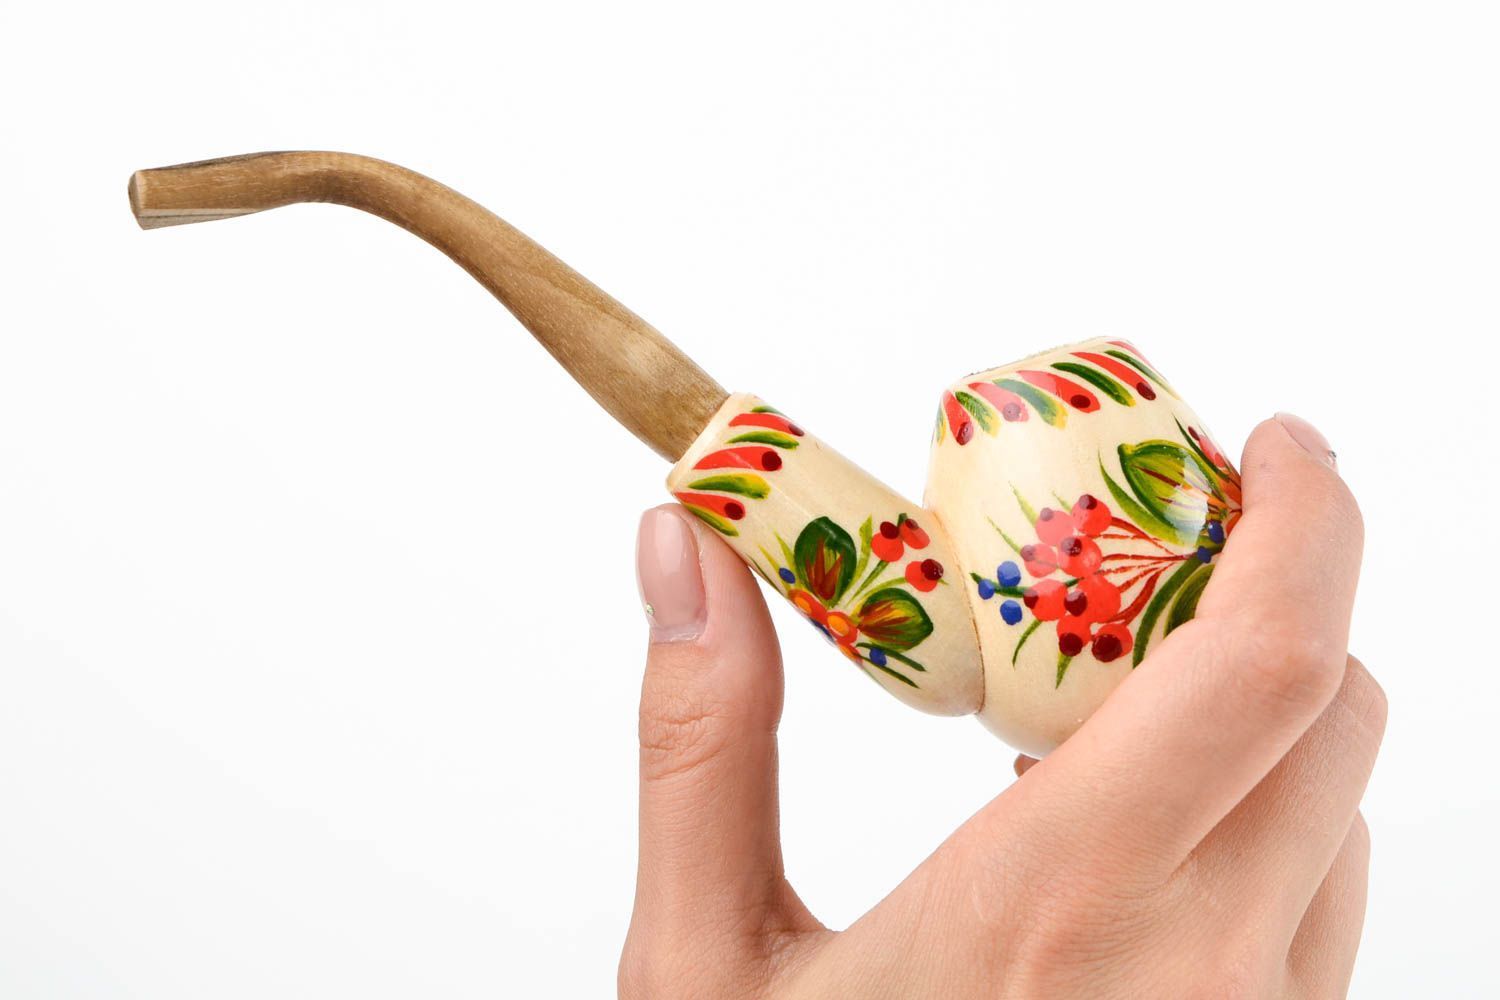 Handmade pipe wooden pipe unusual gift decorative use only wooden smoking pipe photo 2